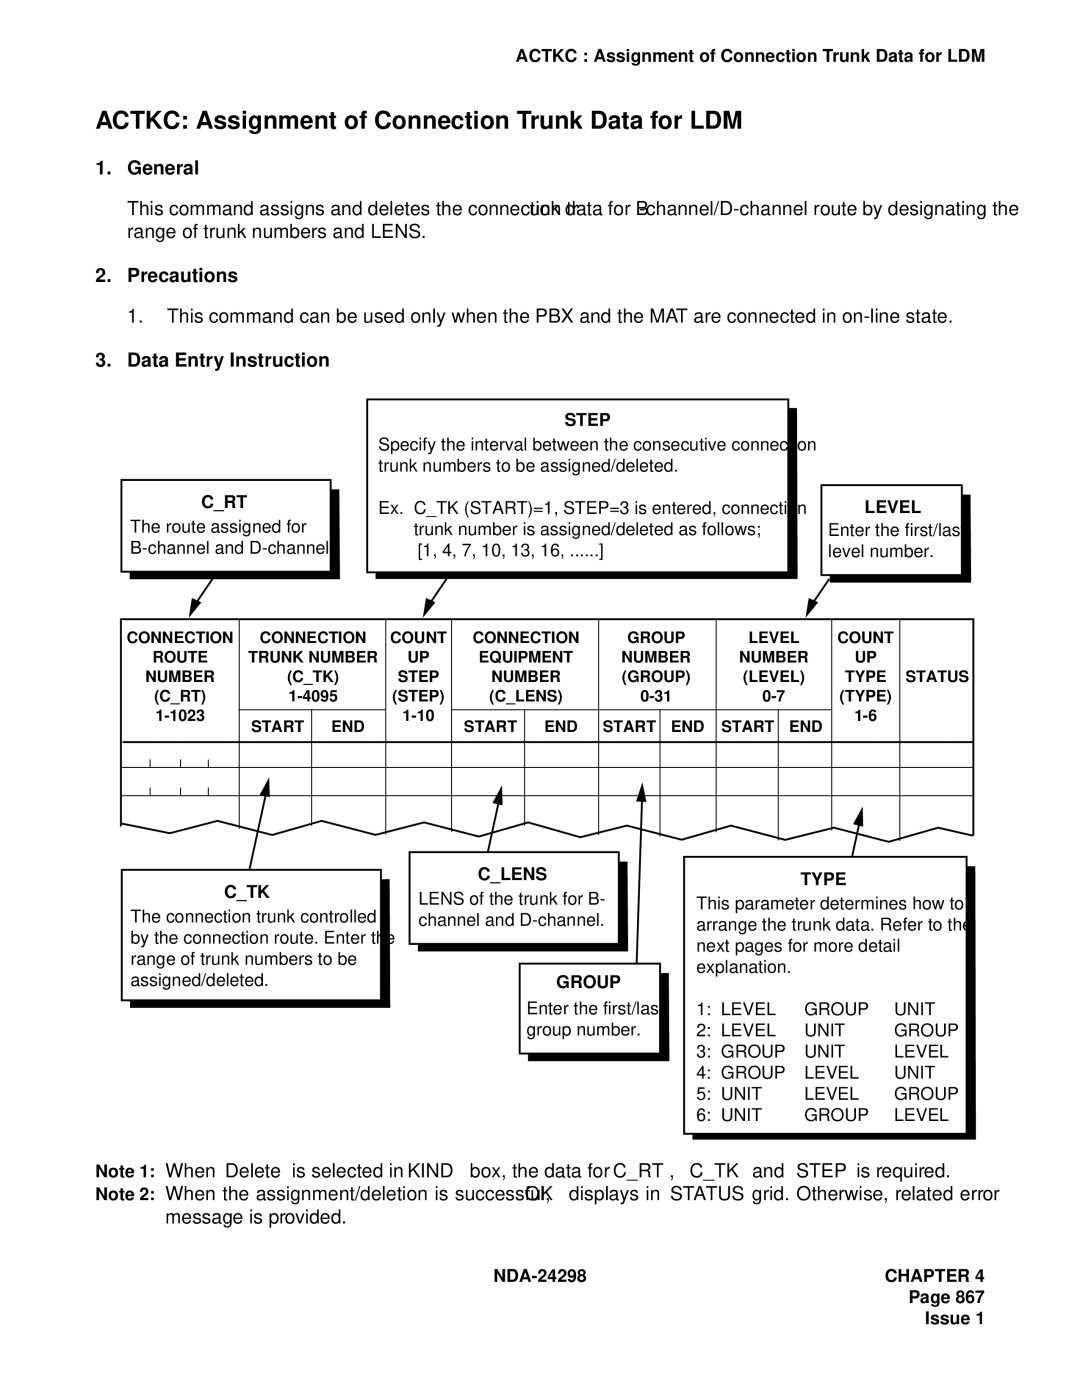 NEC NDA-24298 manual Actkc Assignment of Connection Trunk Data for LDM 